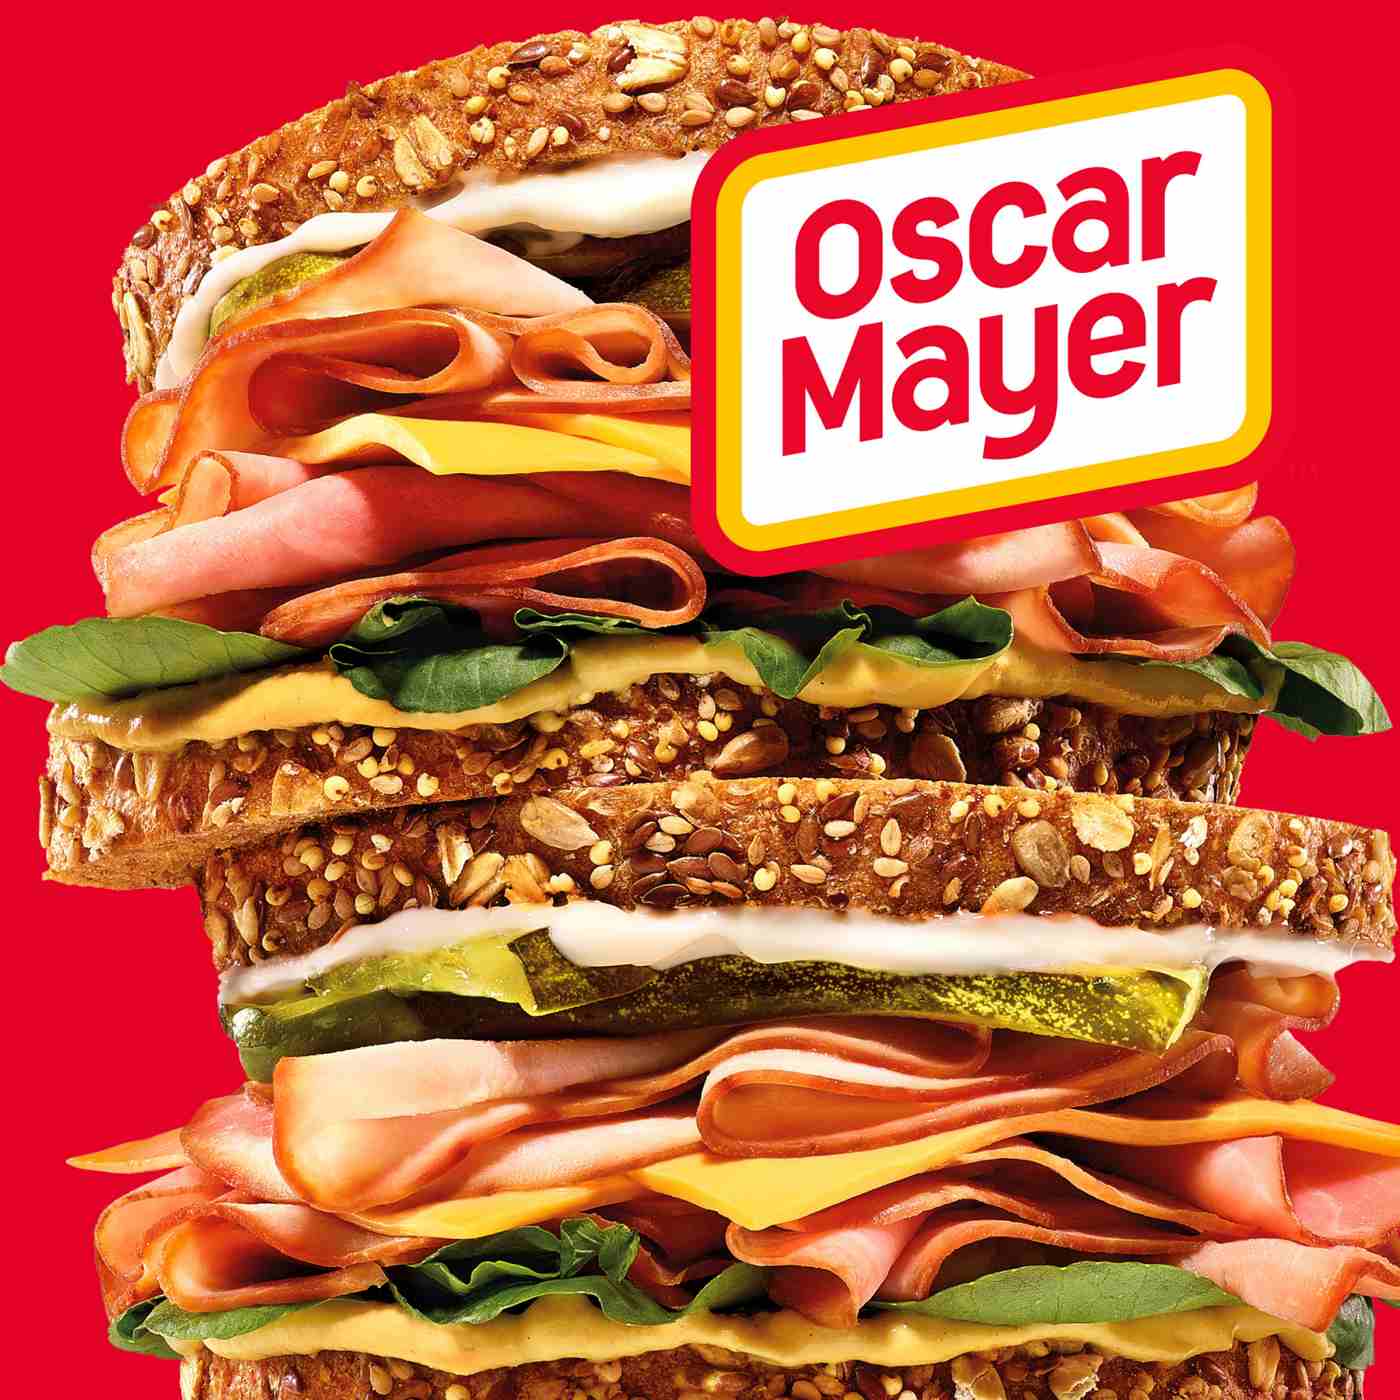 Oscar Mayer Deli Fresh Oven Roasted Turkey Breast & Smoked Uncured Ham Sliced Lunch Meat - Variety Pack; image 2 of 6